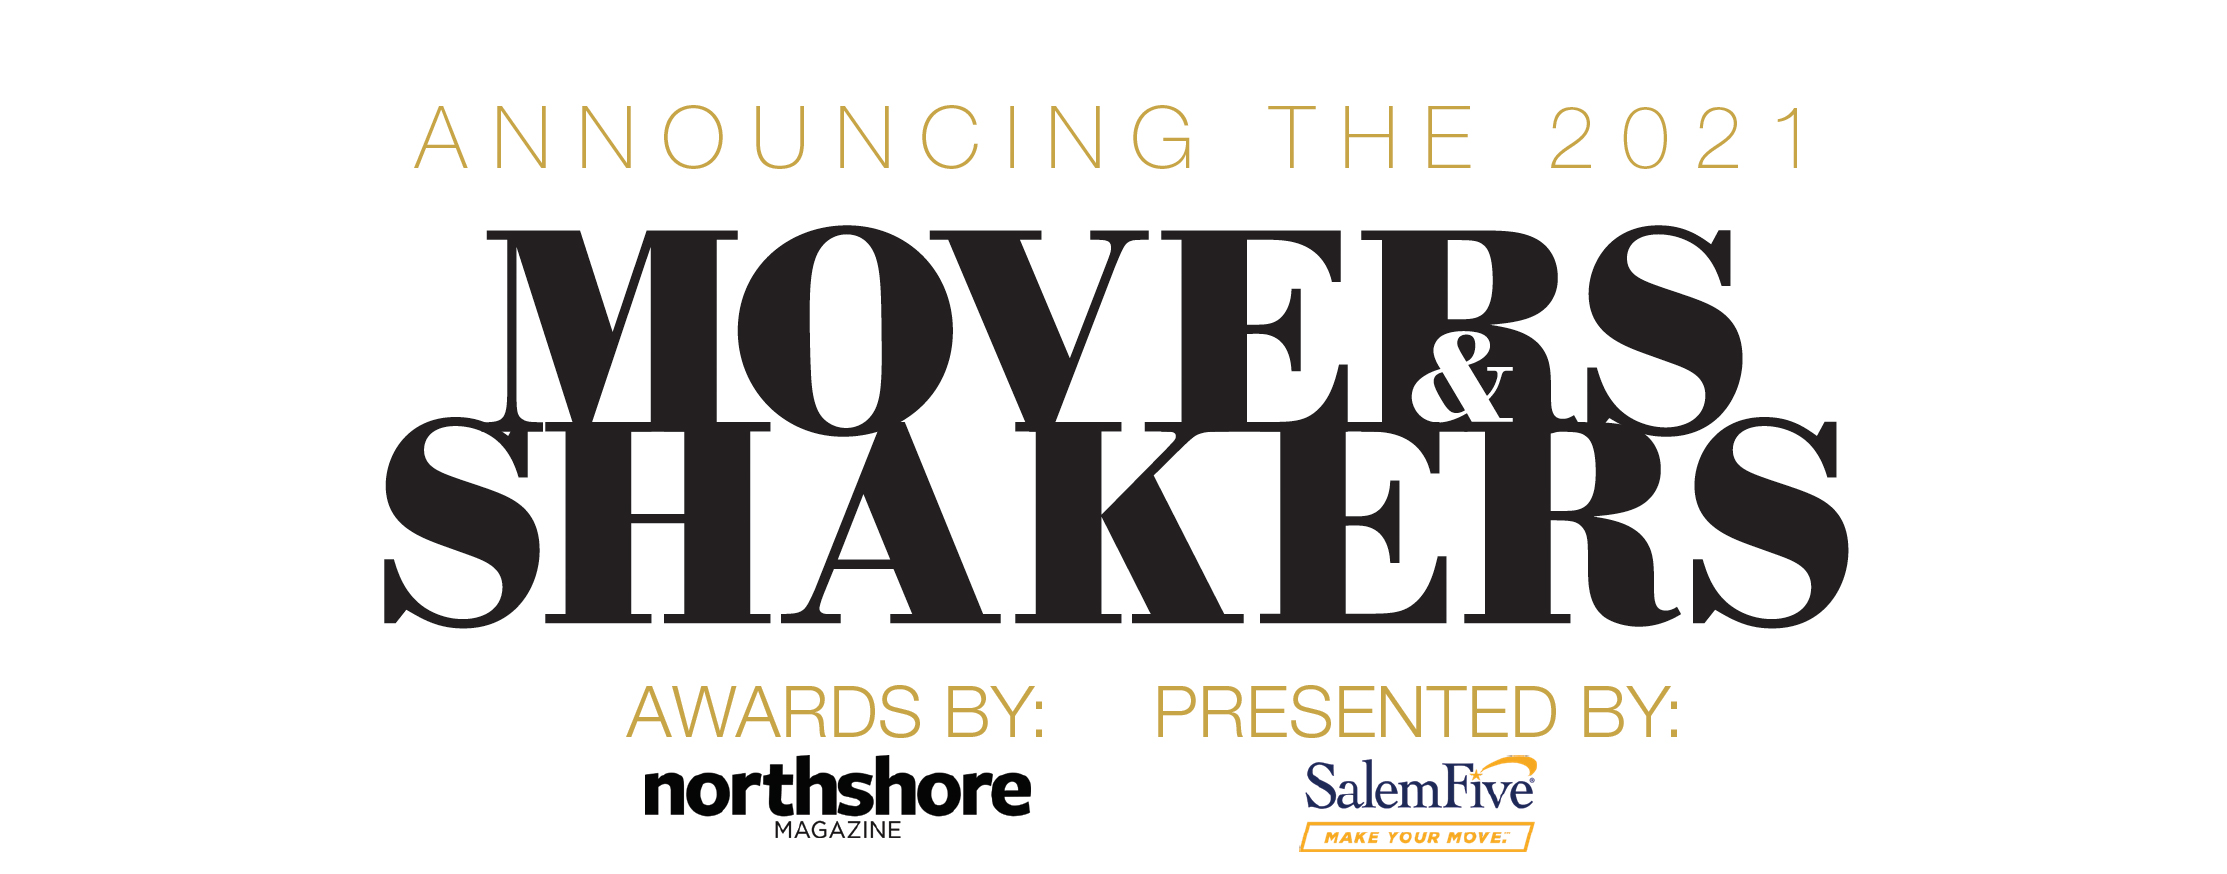 Movers & Shakers 2021